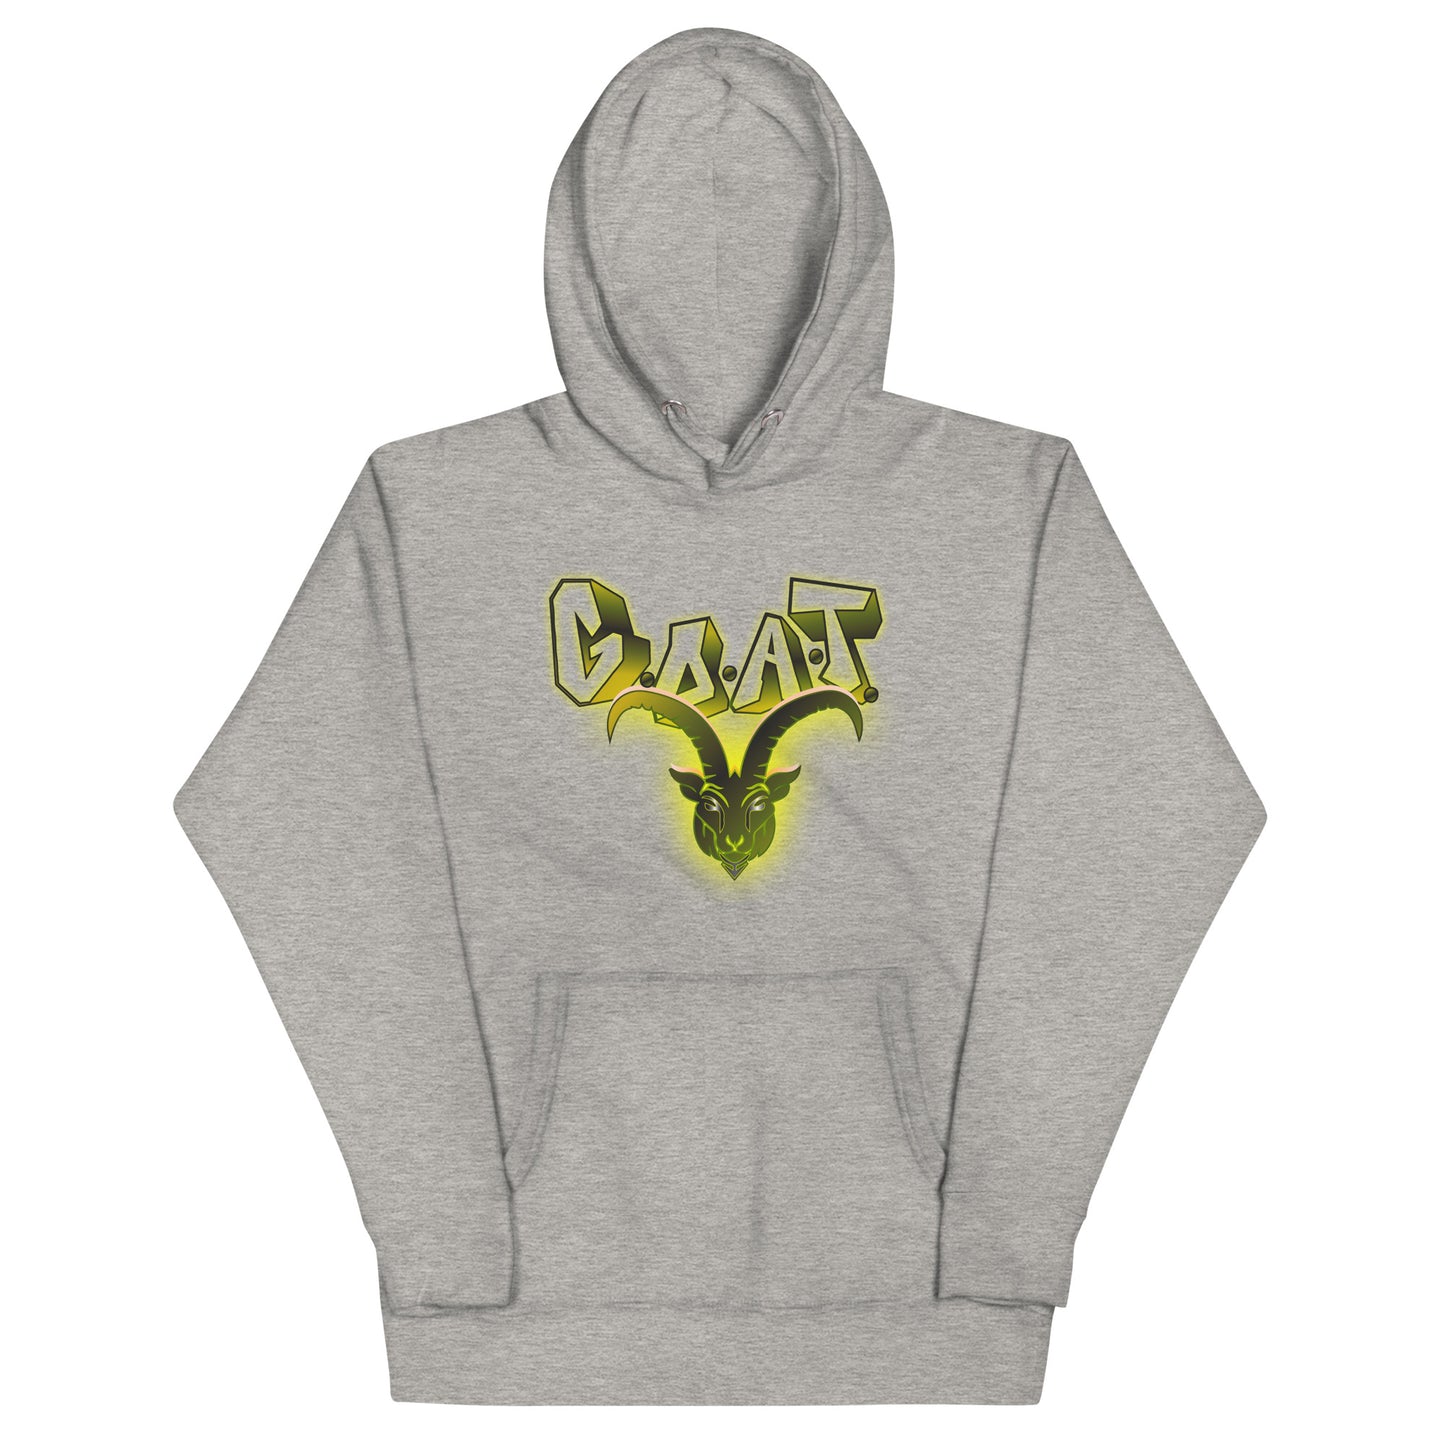 G.O.A.T. Yellow Drip Hoodie (4 Colors)